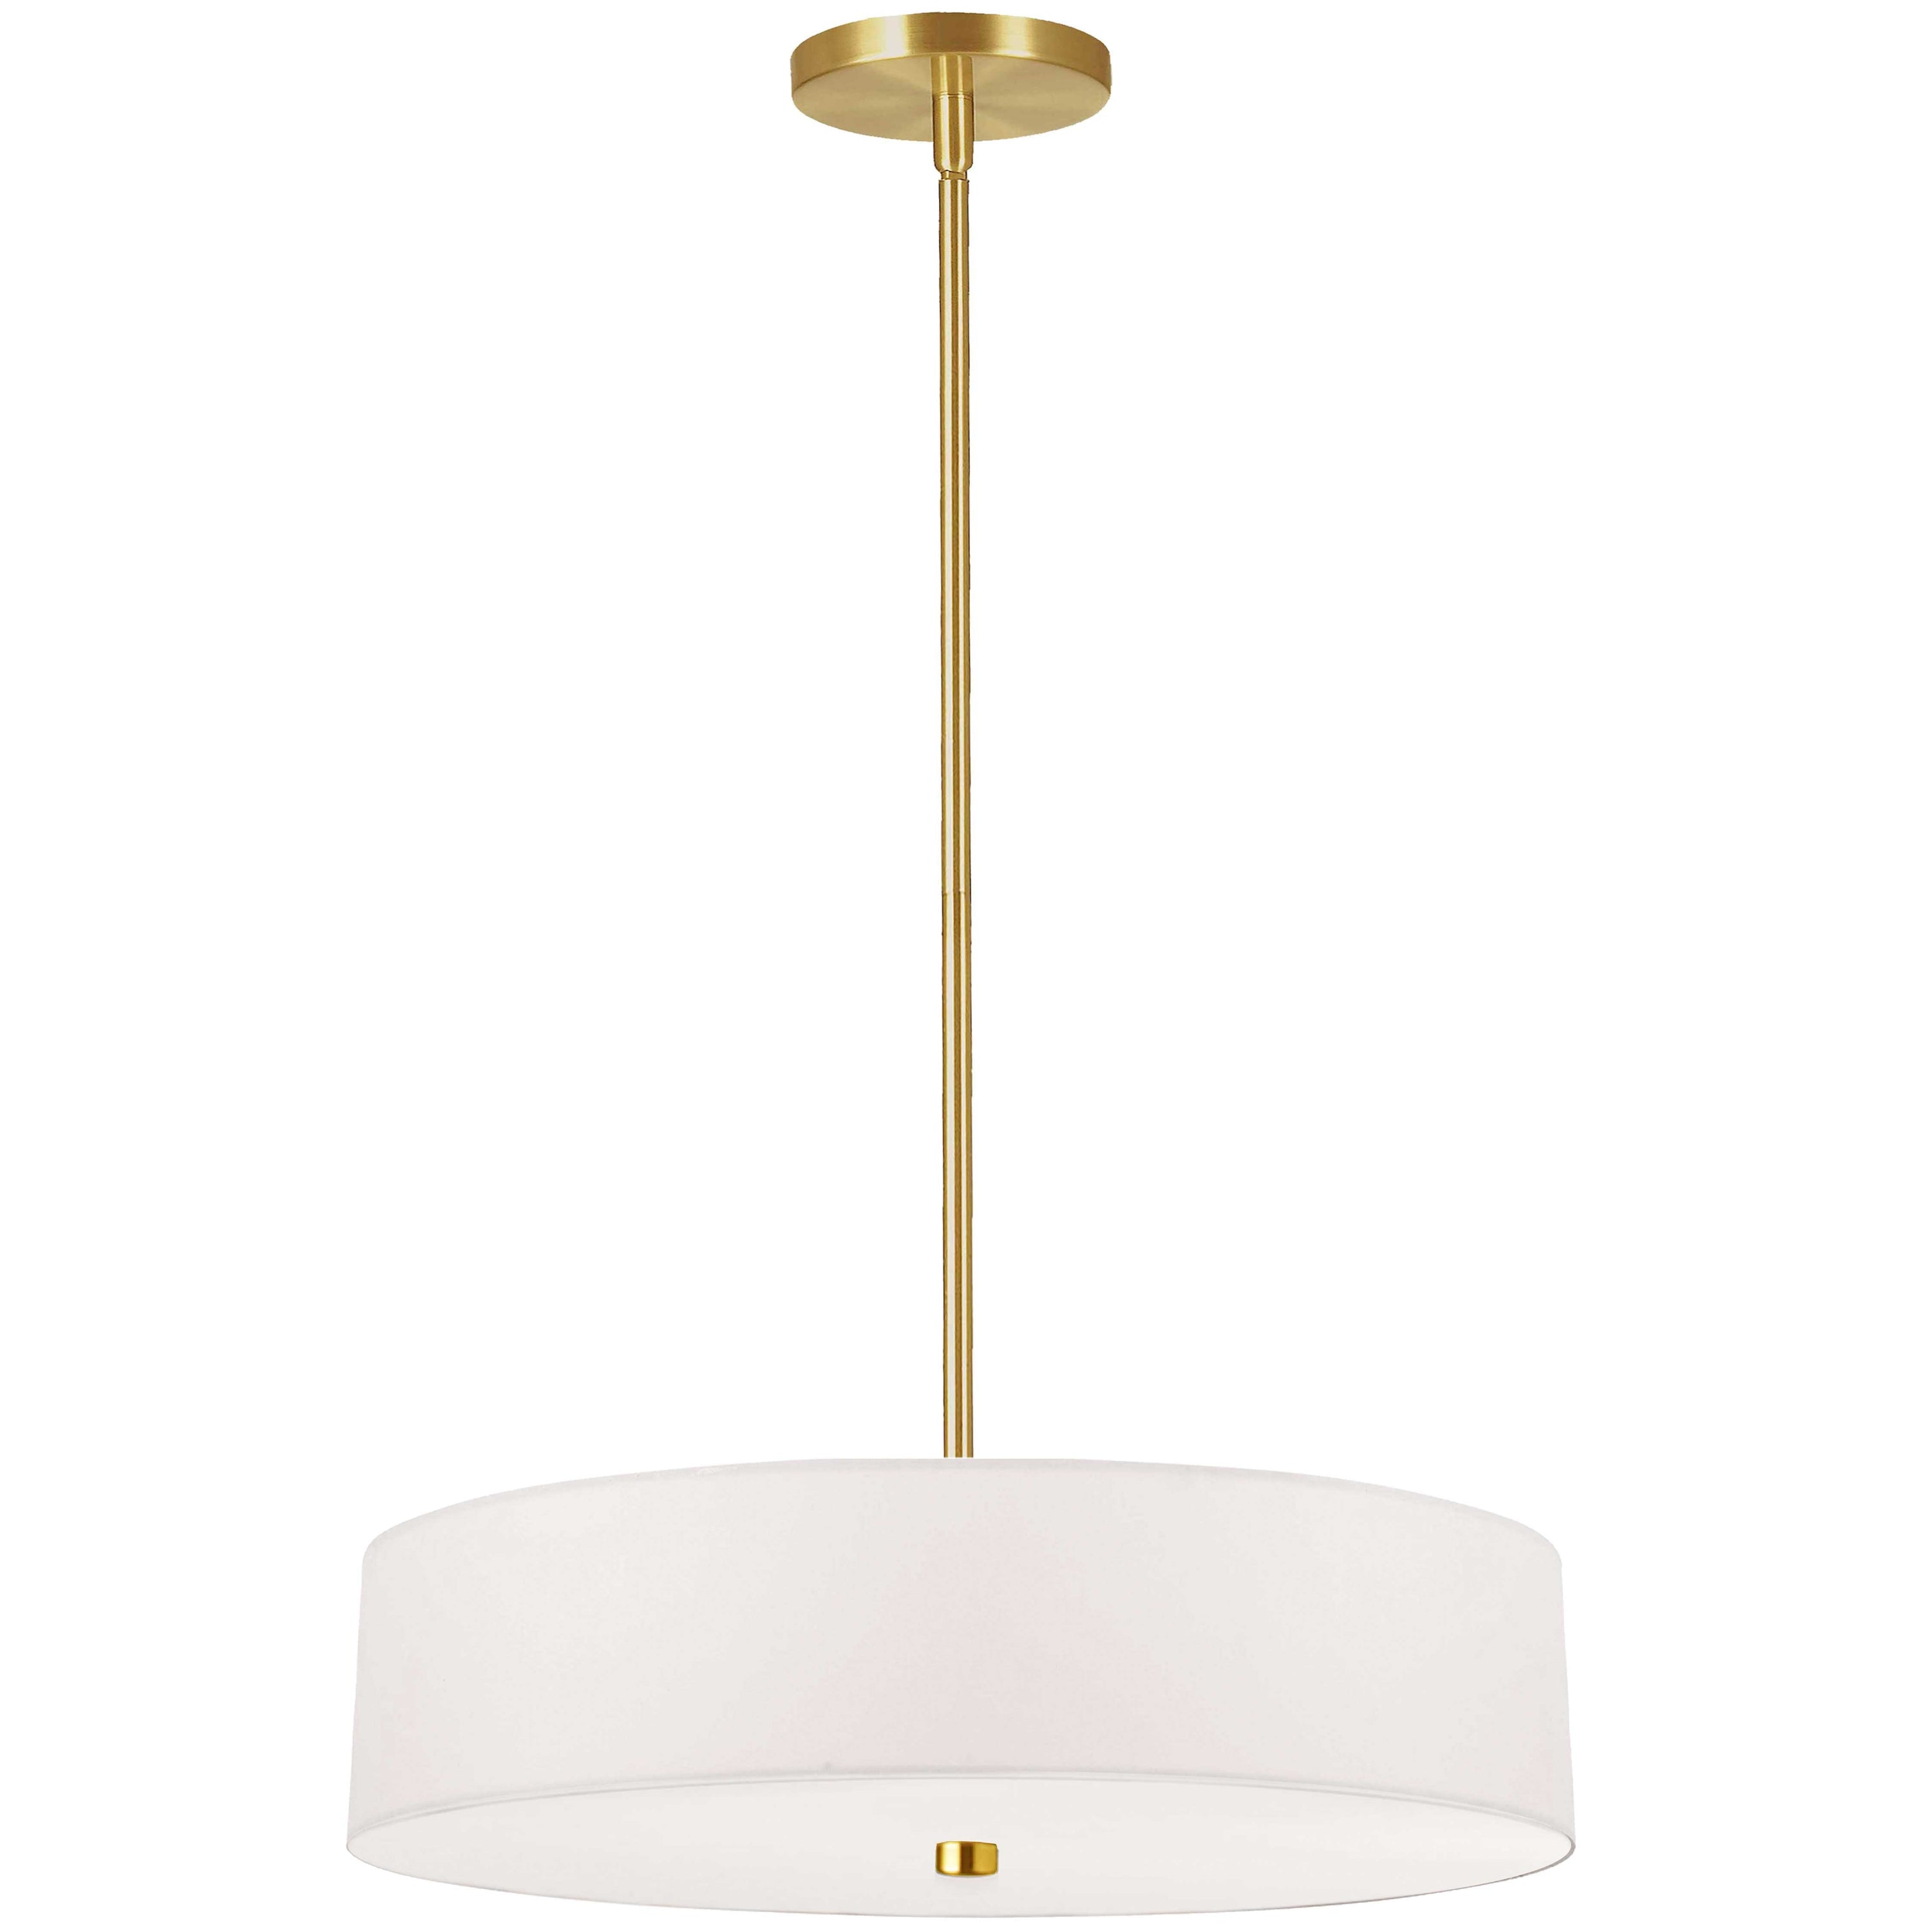 Dainolite Everly - 571-204P-AGB-WH - 4 Light Pendant Aged Brass with White Shade - White